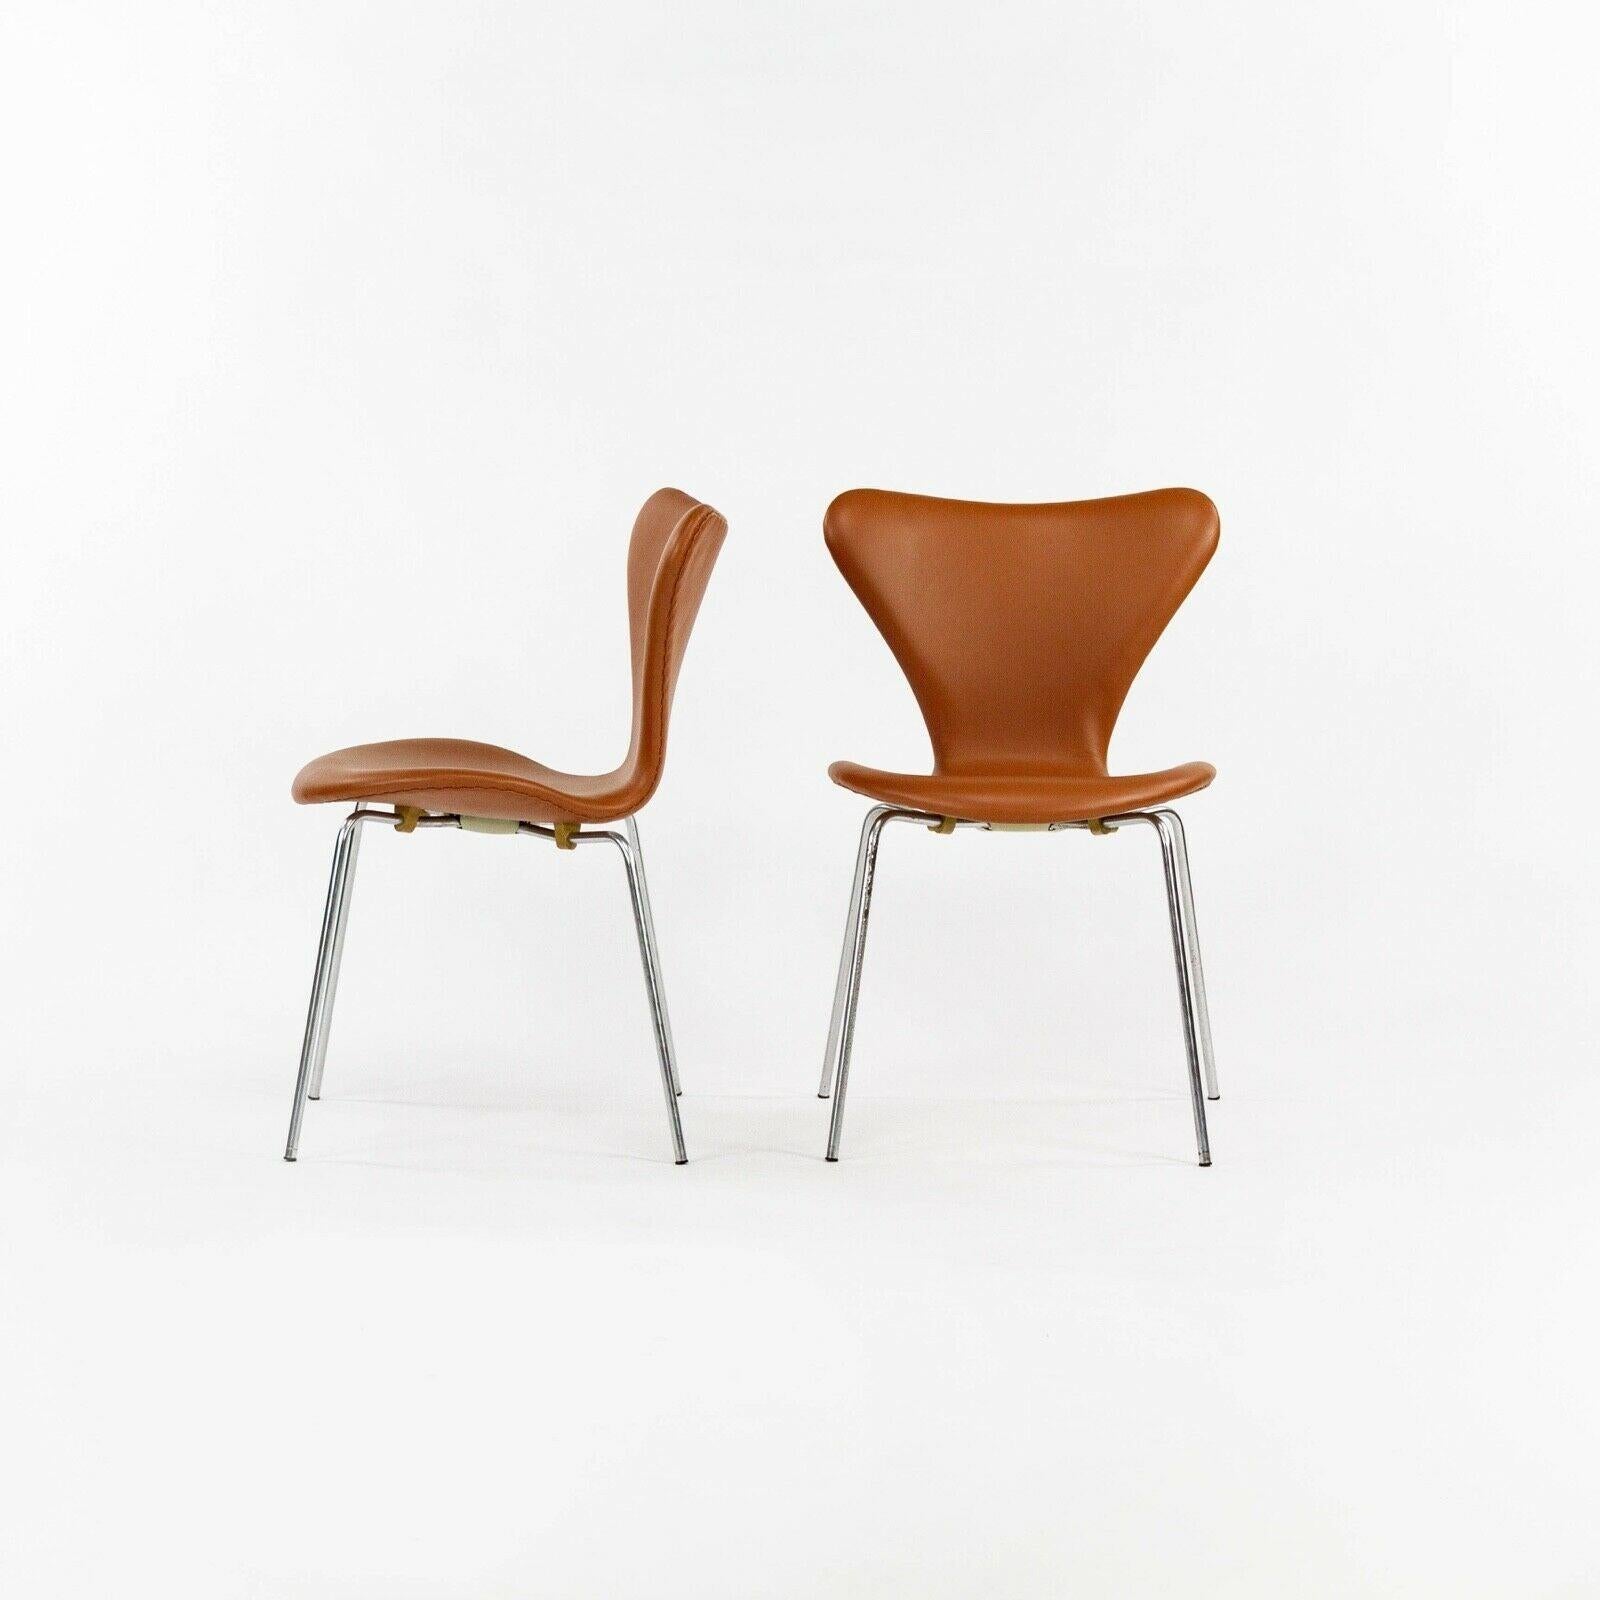 Listed for sale is a set of four (the price listed is for four, however, up to eight side chairs are available and additional armchairs also) Arne Jacobsen Series 7 armchairs in cognac leather. These chairs were just masterfully reupholstered by one